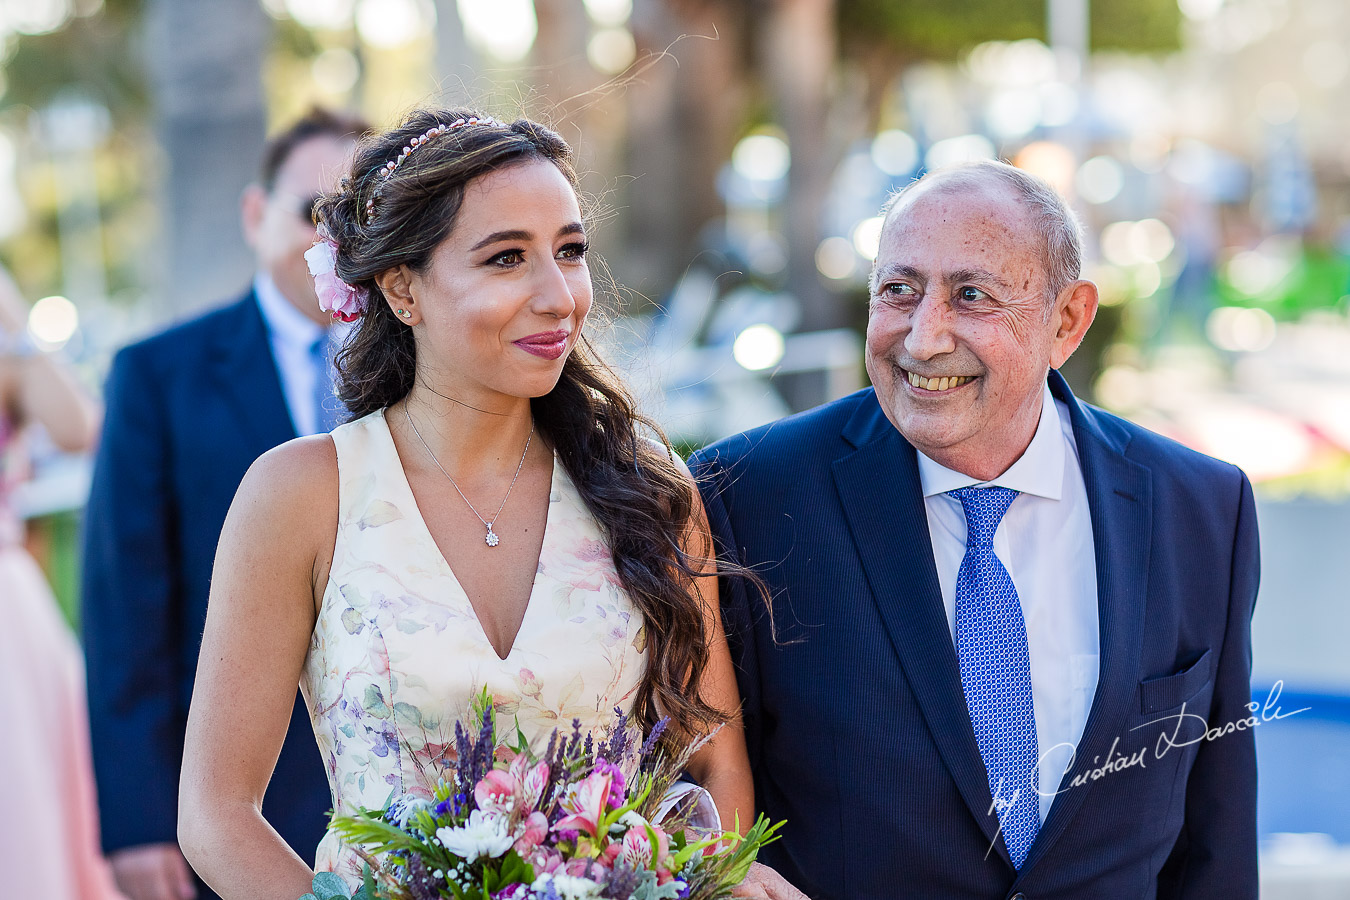 The bride coming down the isle with her father photographed during the ceremony, as part of an Exclusive Wedding photography at Grand Resort Limassol, captured by Cyprus Wedding Photographer Cristian Dascalu.